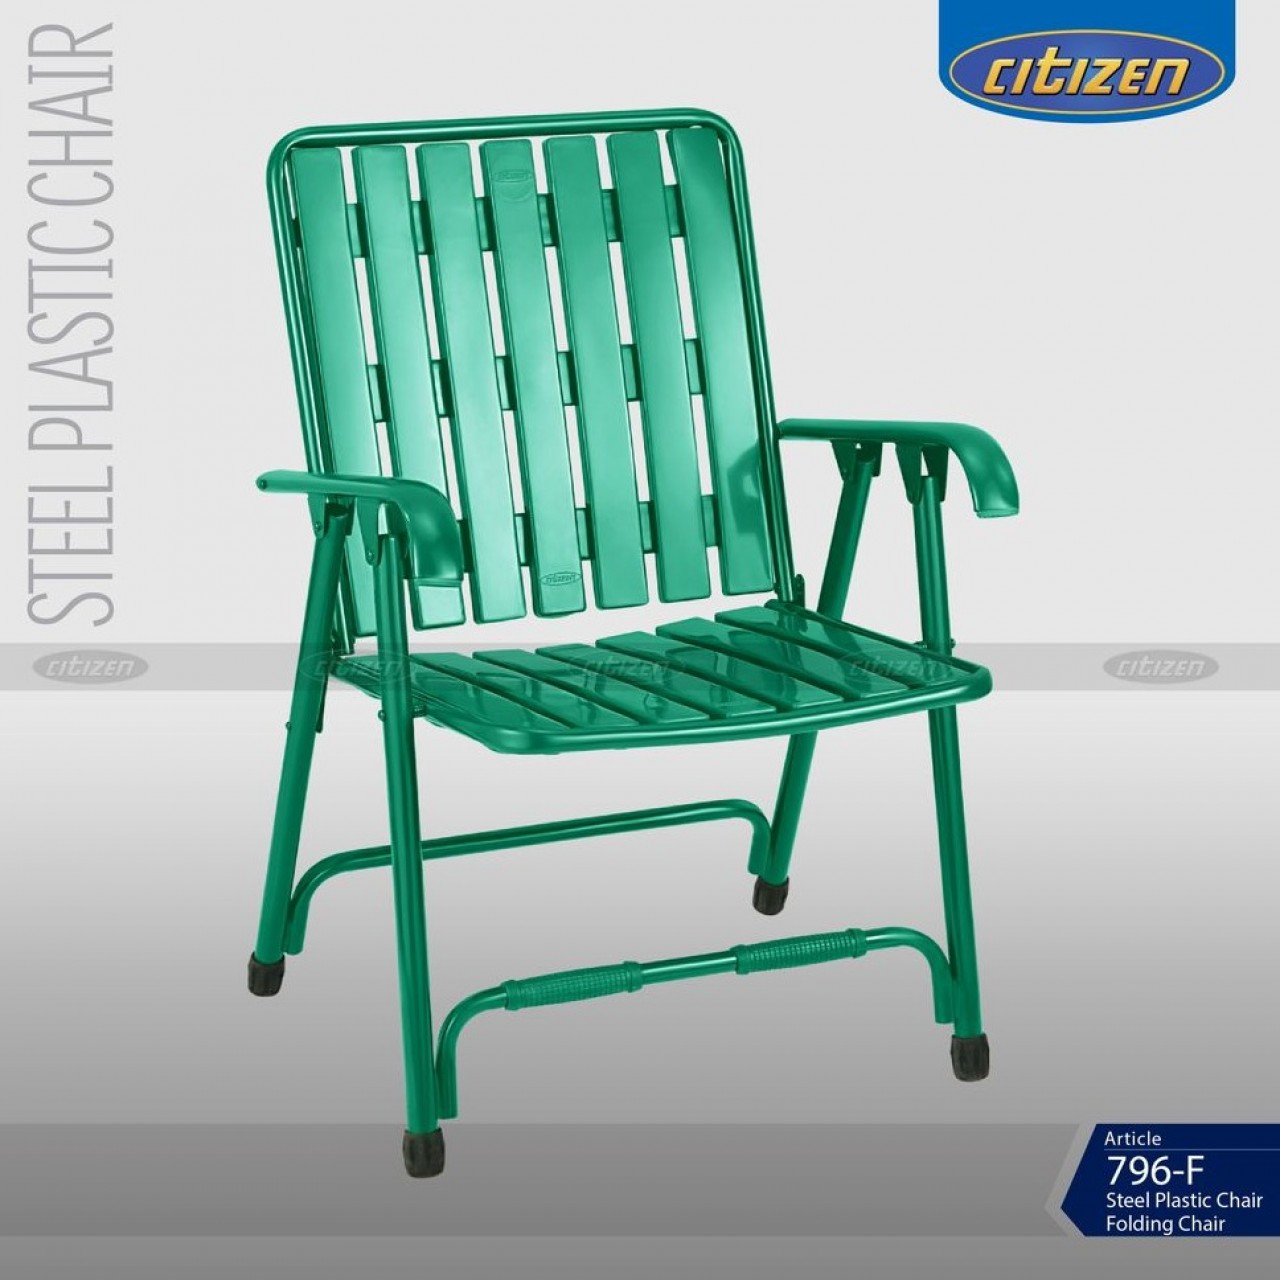 Citizen 796-F Steel & Plastic Folding Chair  With Arms